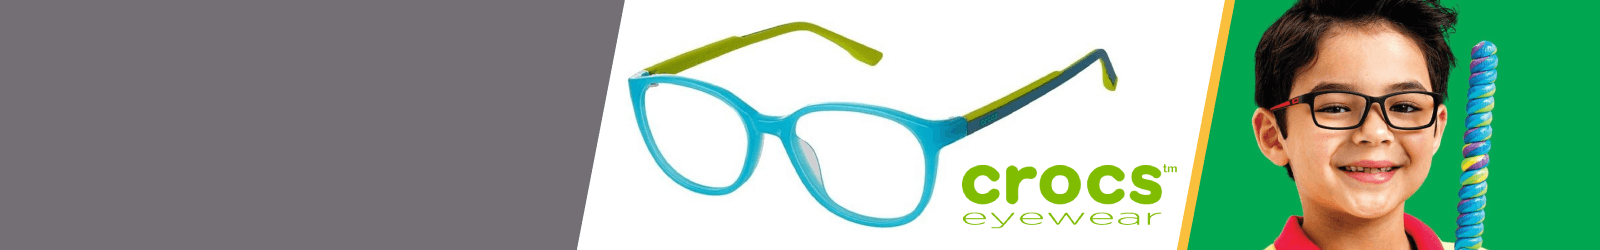 Aqua Crocs  Eyeglasses Accessories for Kids from 11 to 13-year-old